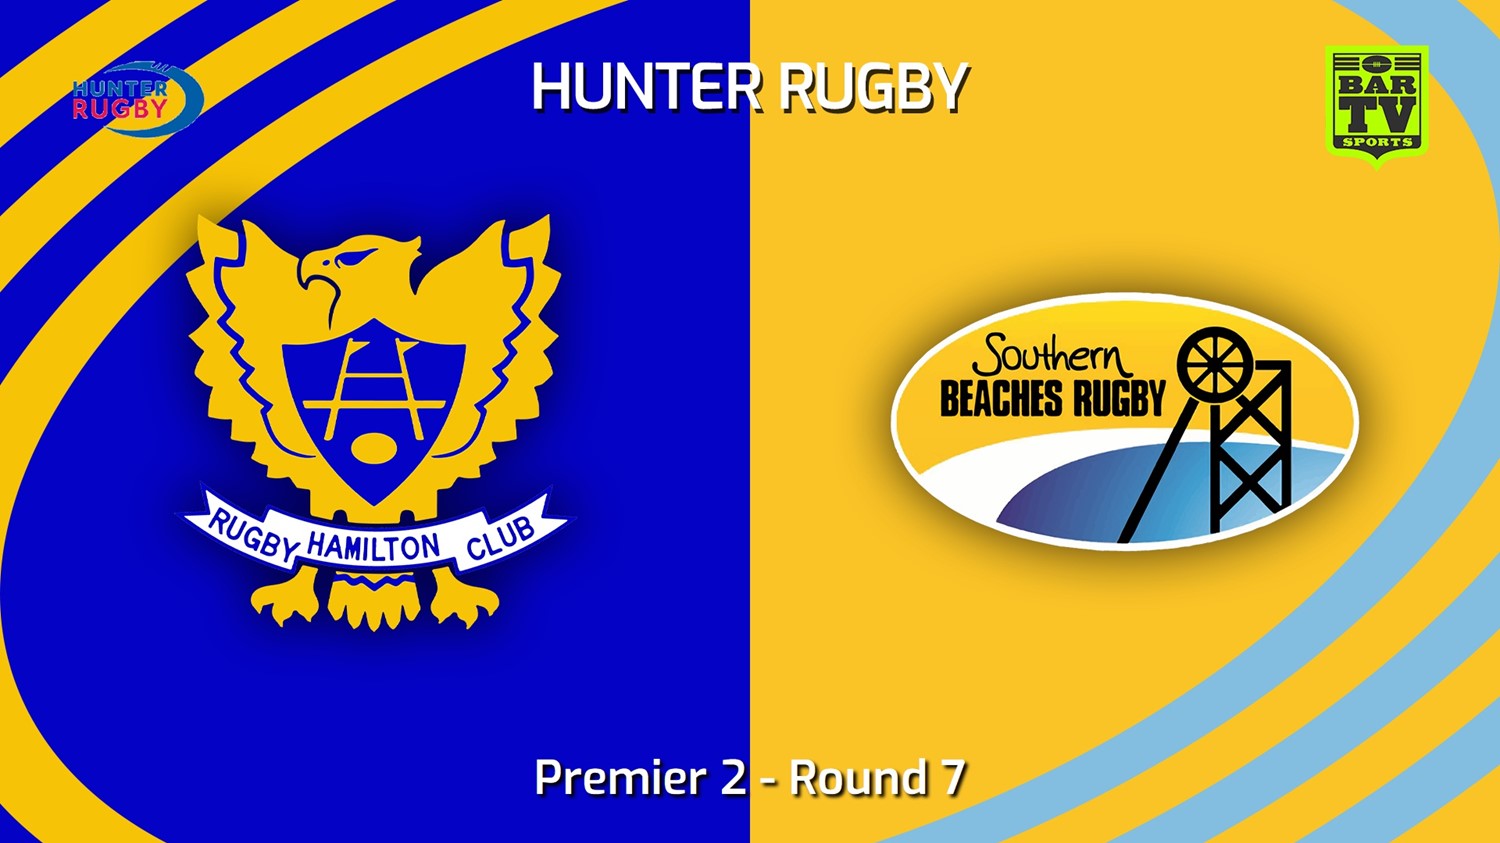 240525-video-Hunter Rugby Round 7 - Premier 2 - Hamilton Hawks v Southern Beaches Slate Image